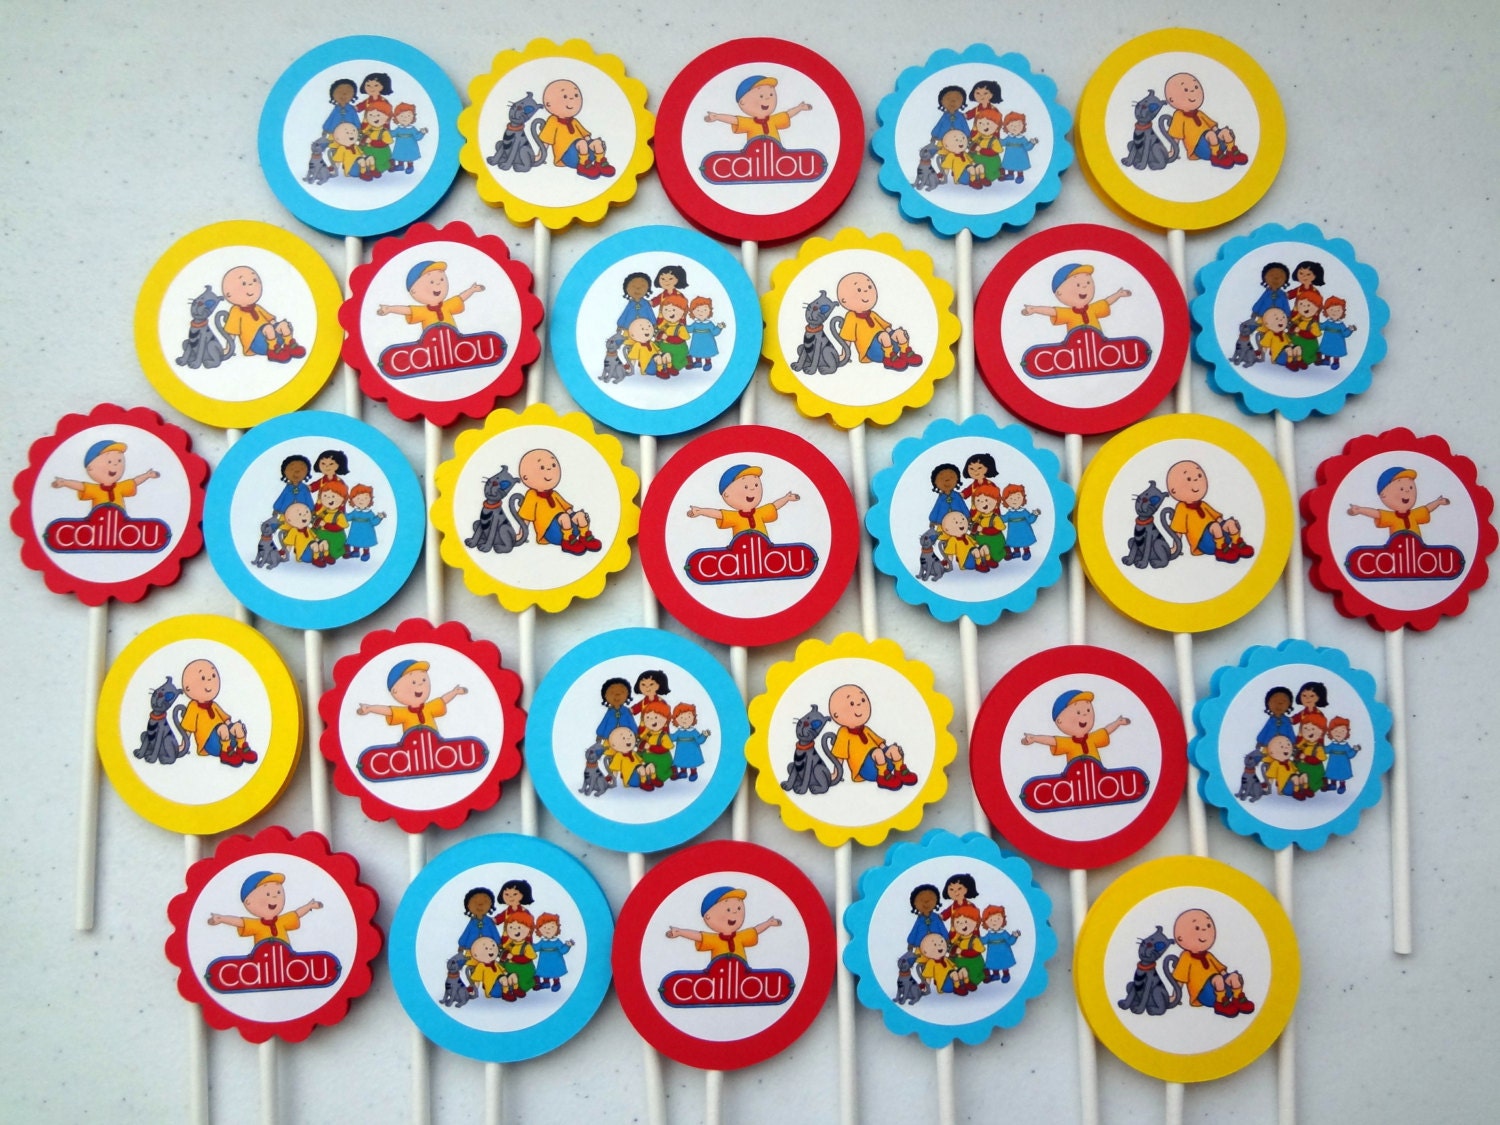 Caillou Birthday Cake on 30 Ct Caillou Personalized Birthday Party Favors Decoration Cupcake